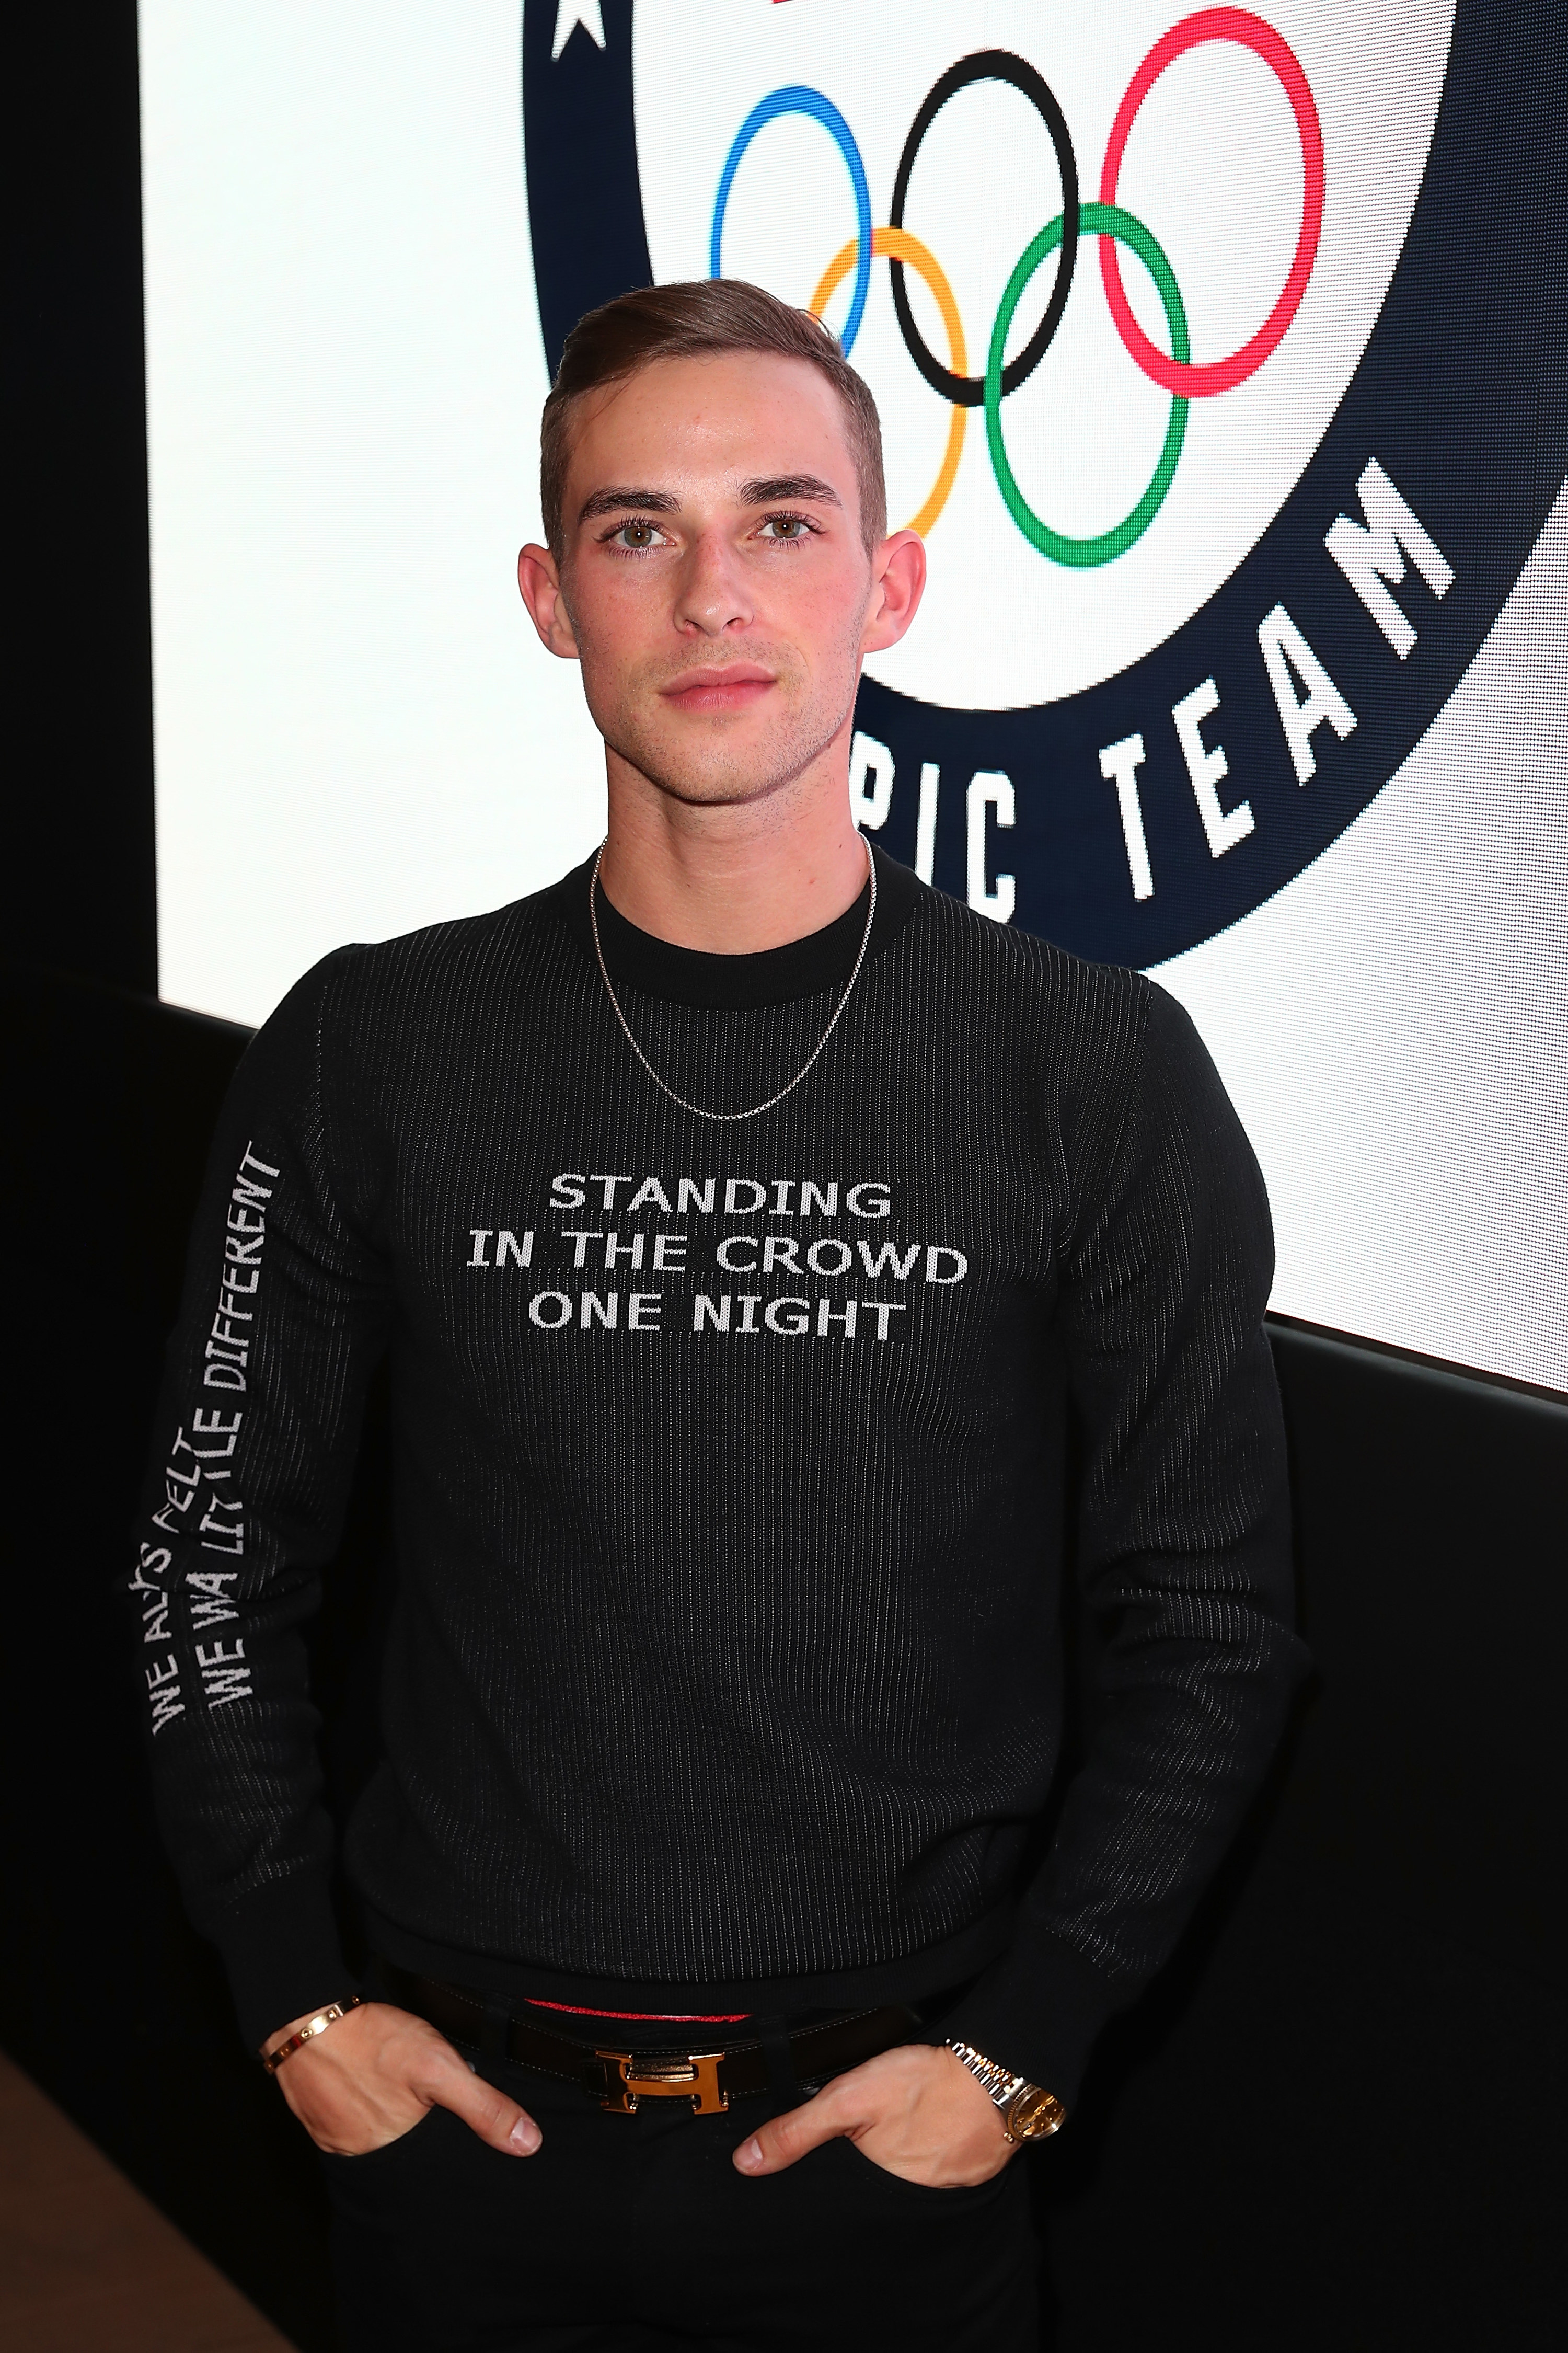 adam in front of a wall with an image of the olympic rings